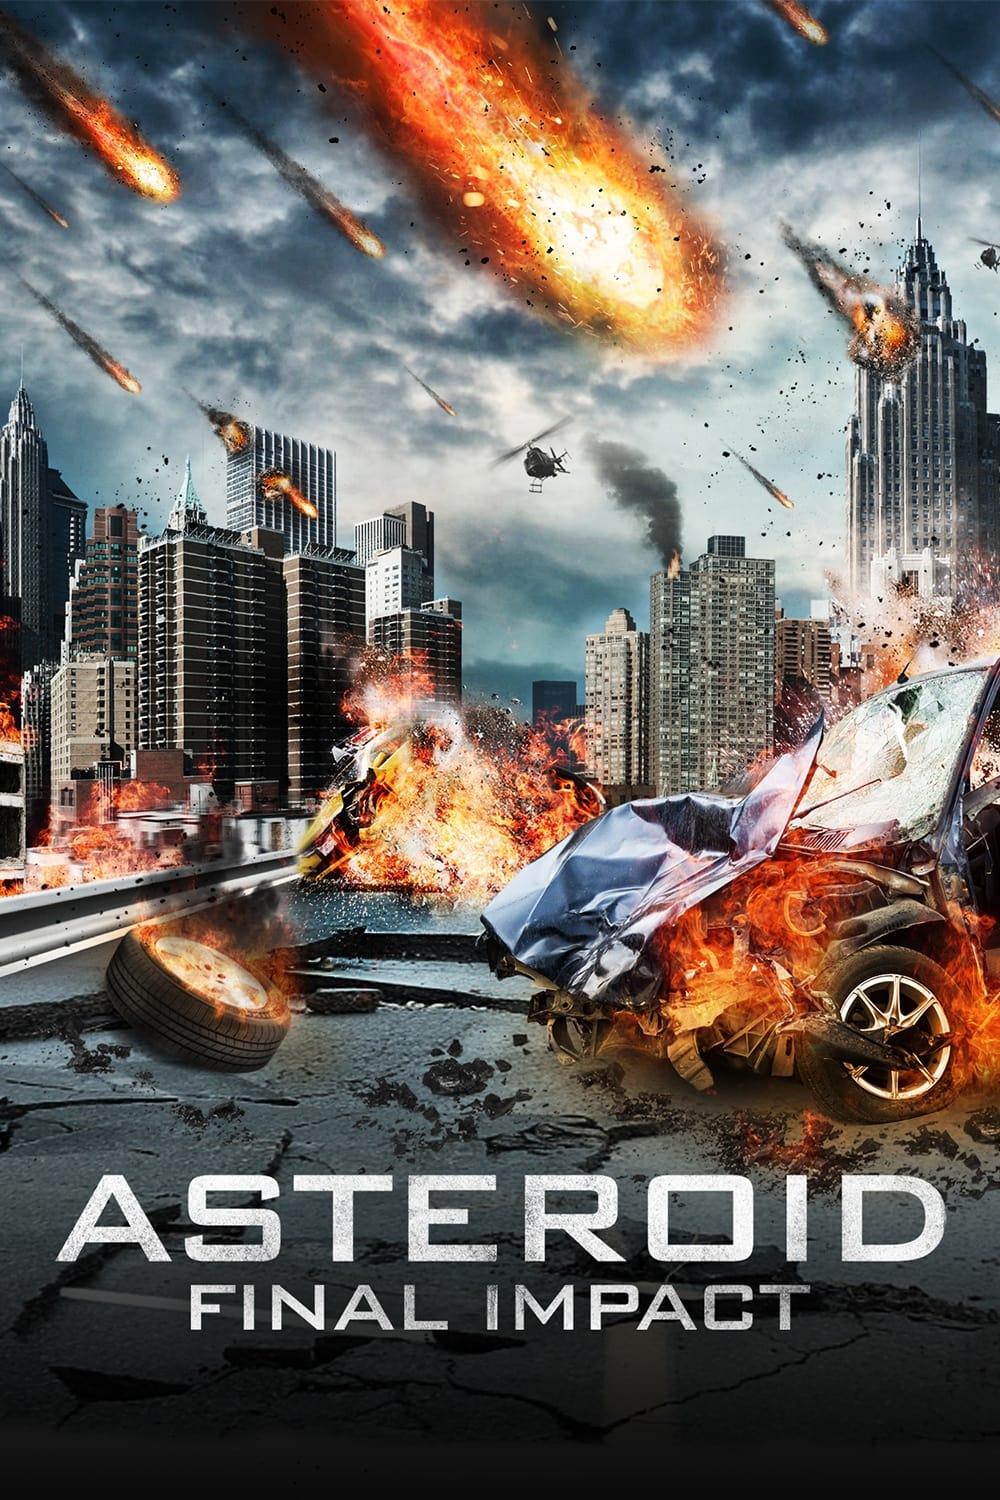 Asteroid: Final Impact poster